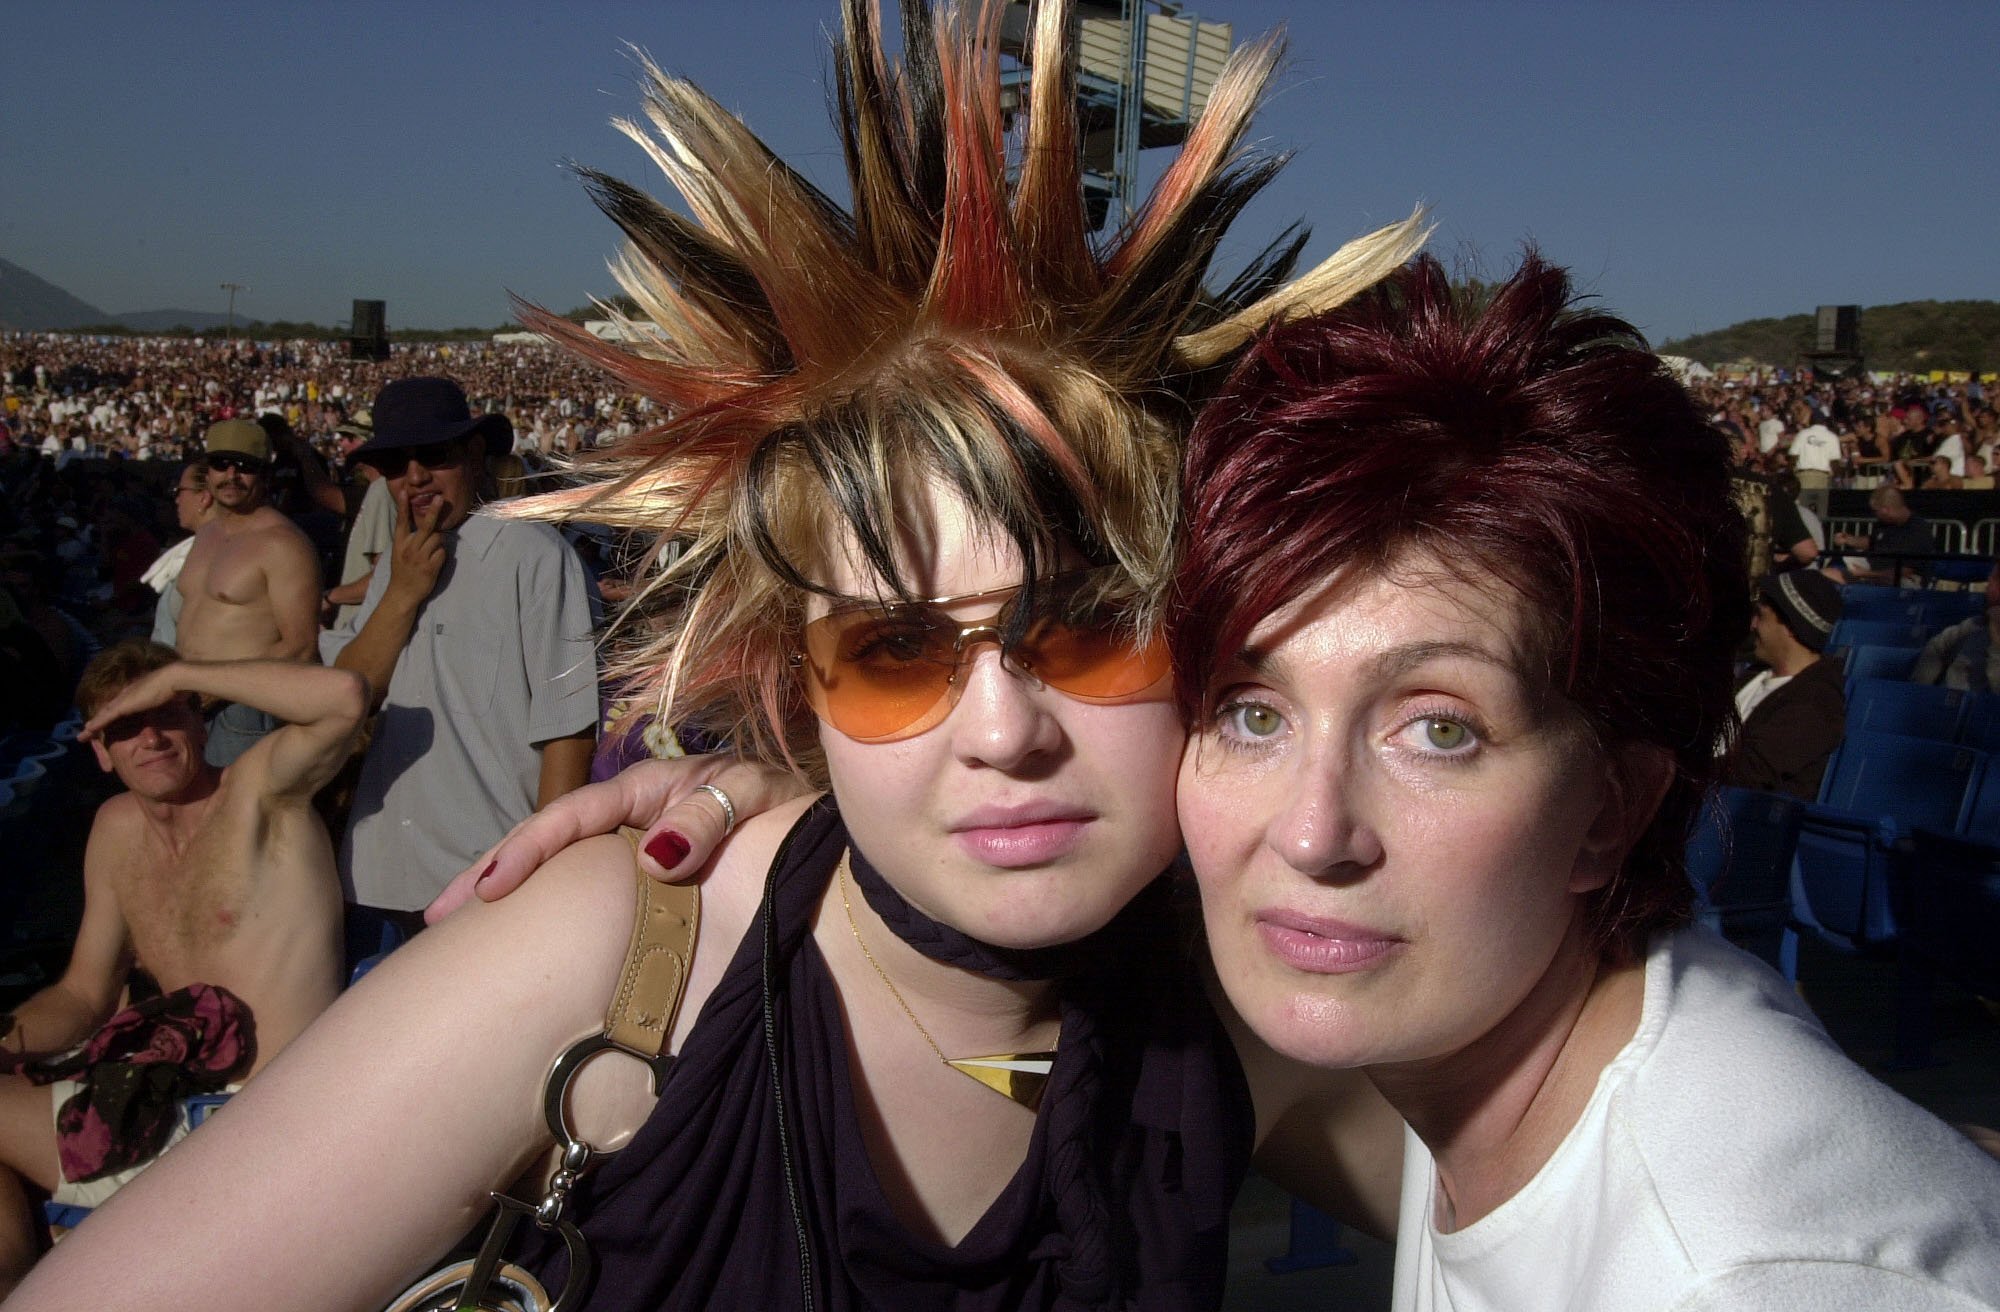 Kelly pictured with mom Sharon Osbourne in 2001